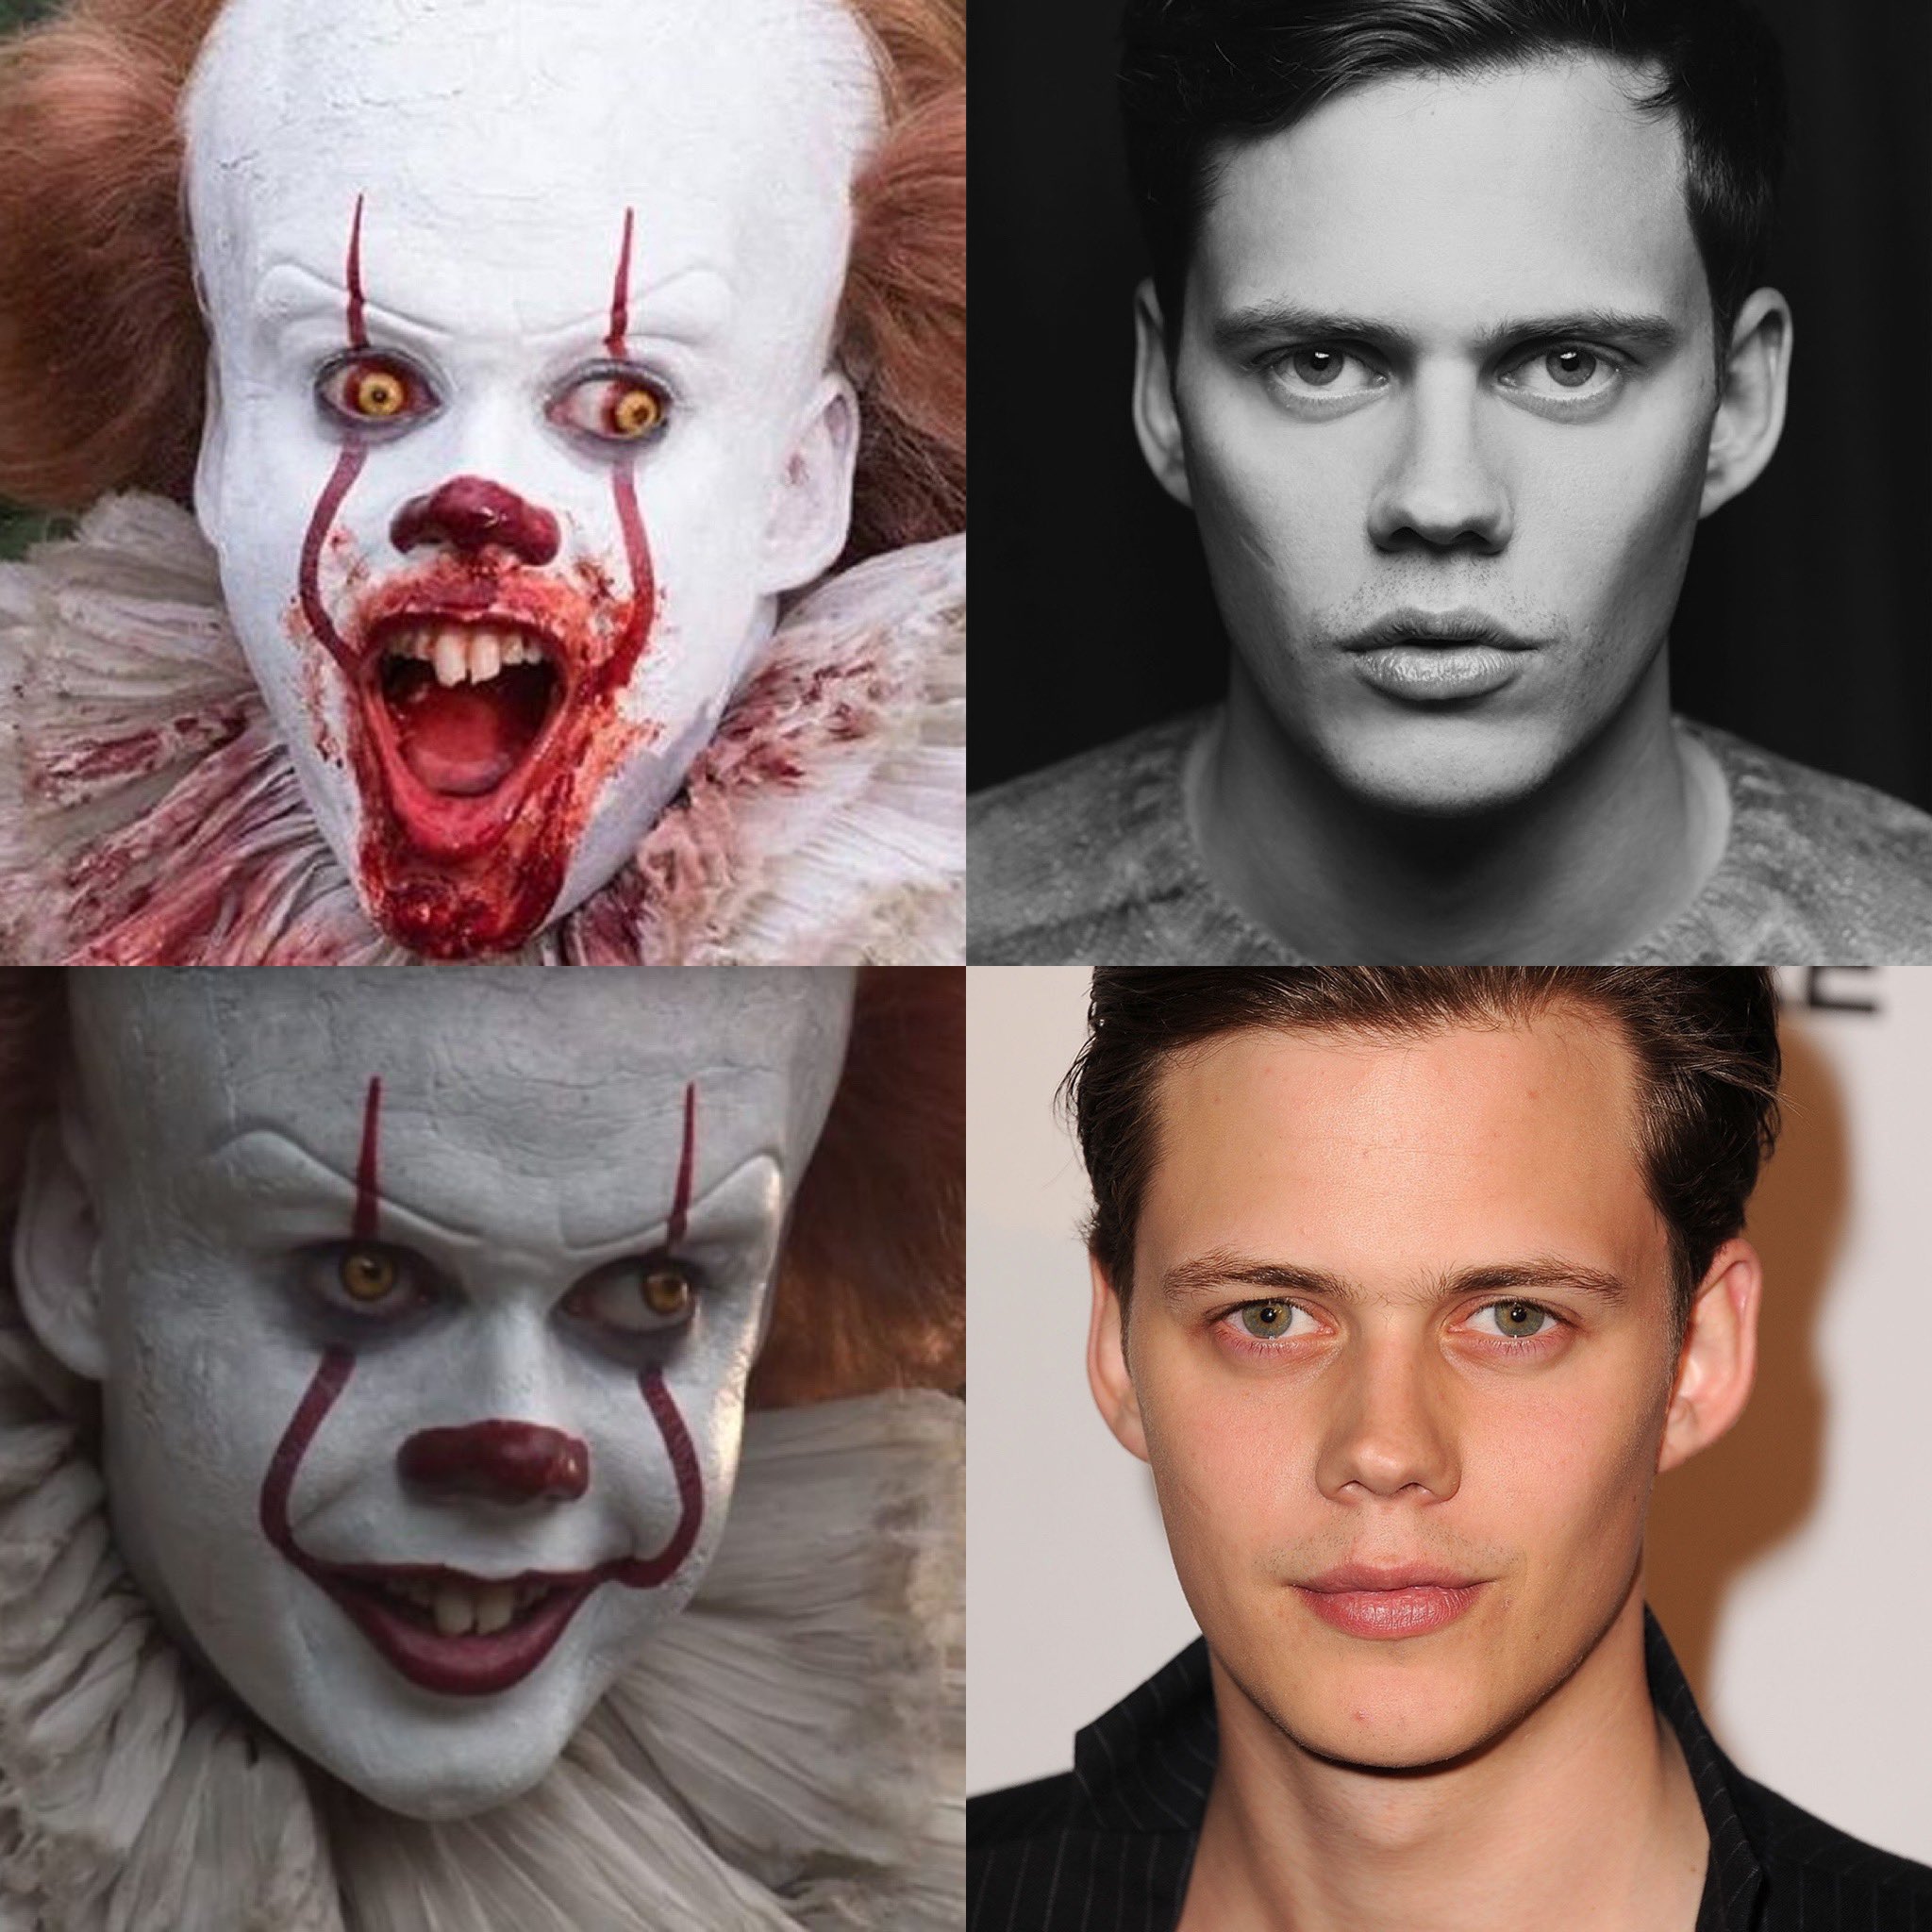 Happy 30th birthday to Bill Skarsgard! Thank you for scaring the crap out of us as Pennywise the Clown! 